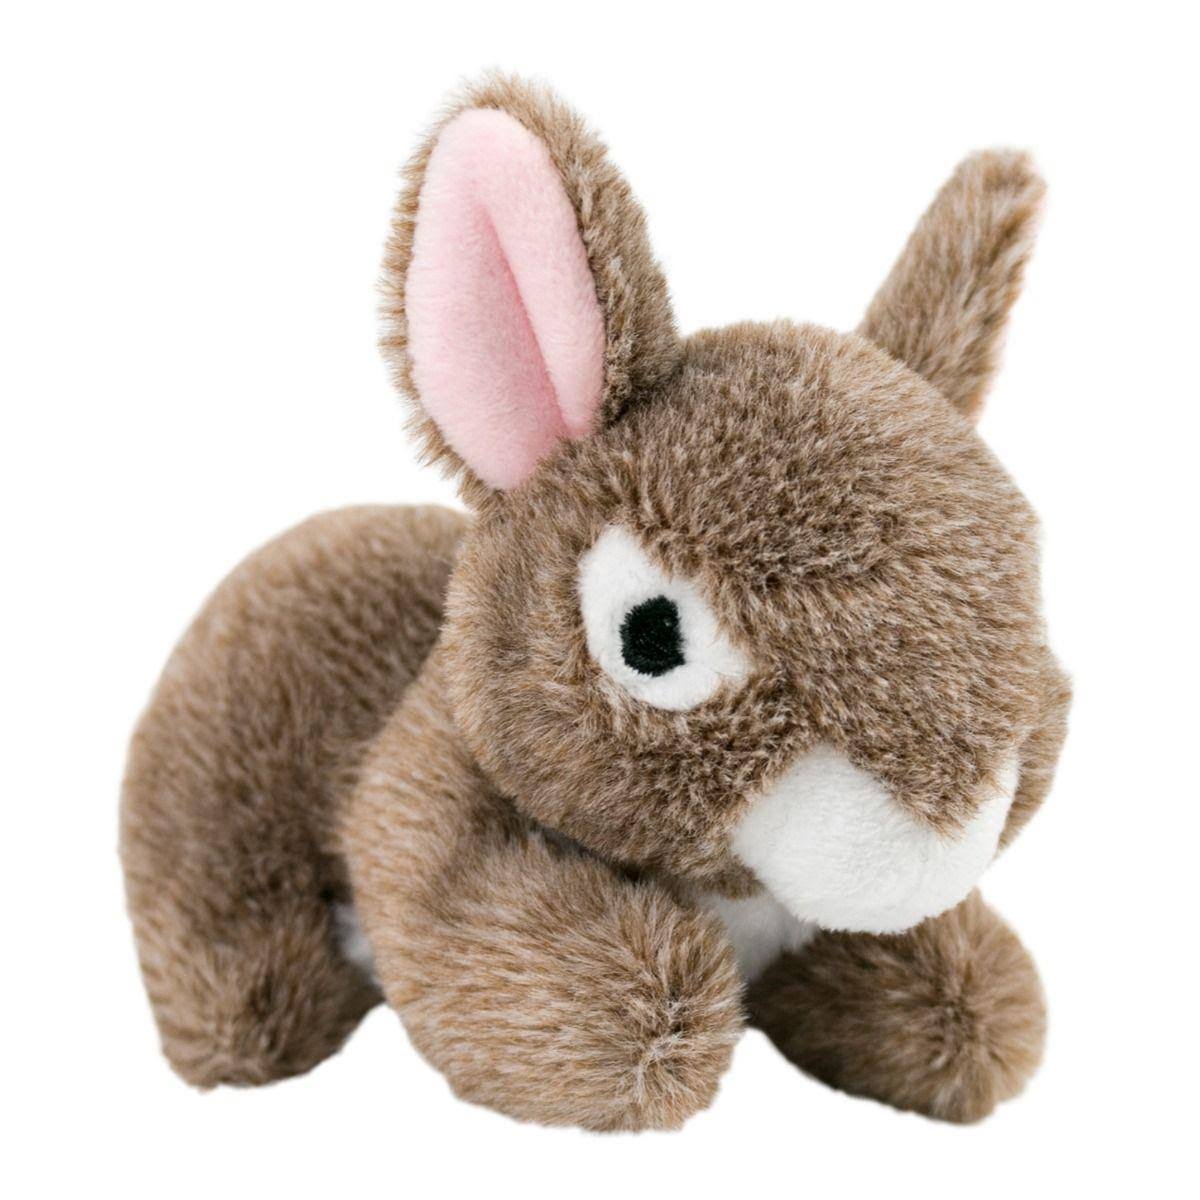 Tall Tails Baby Bunny 5"